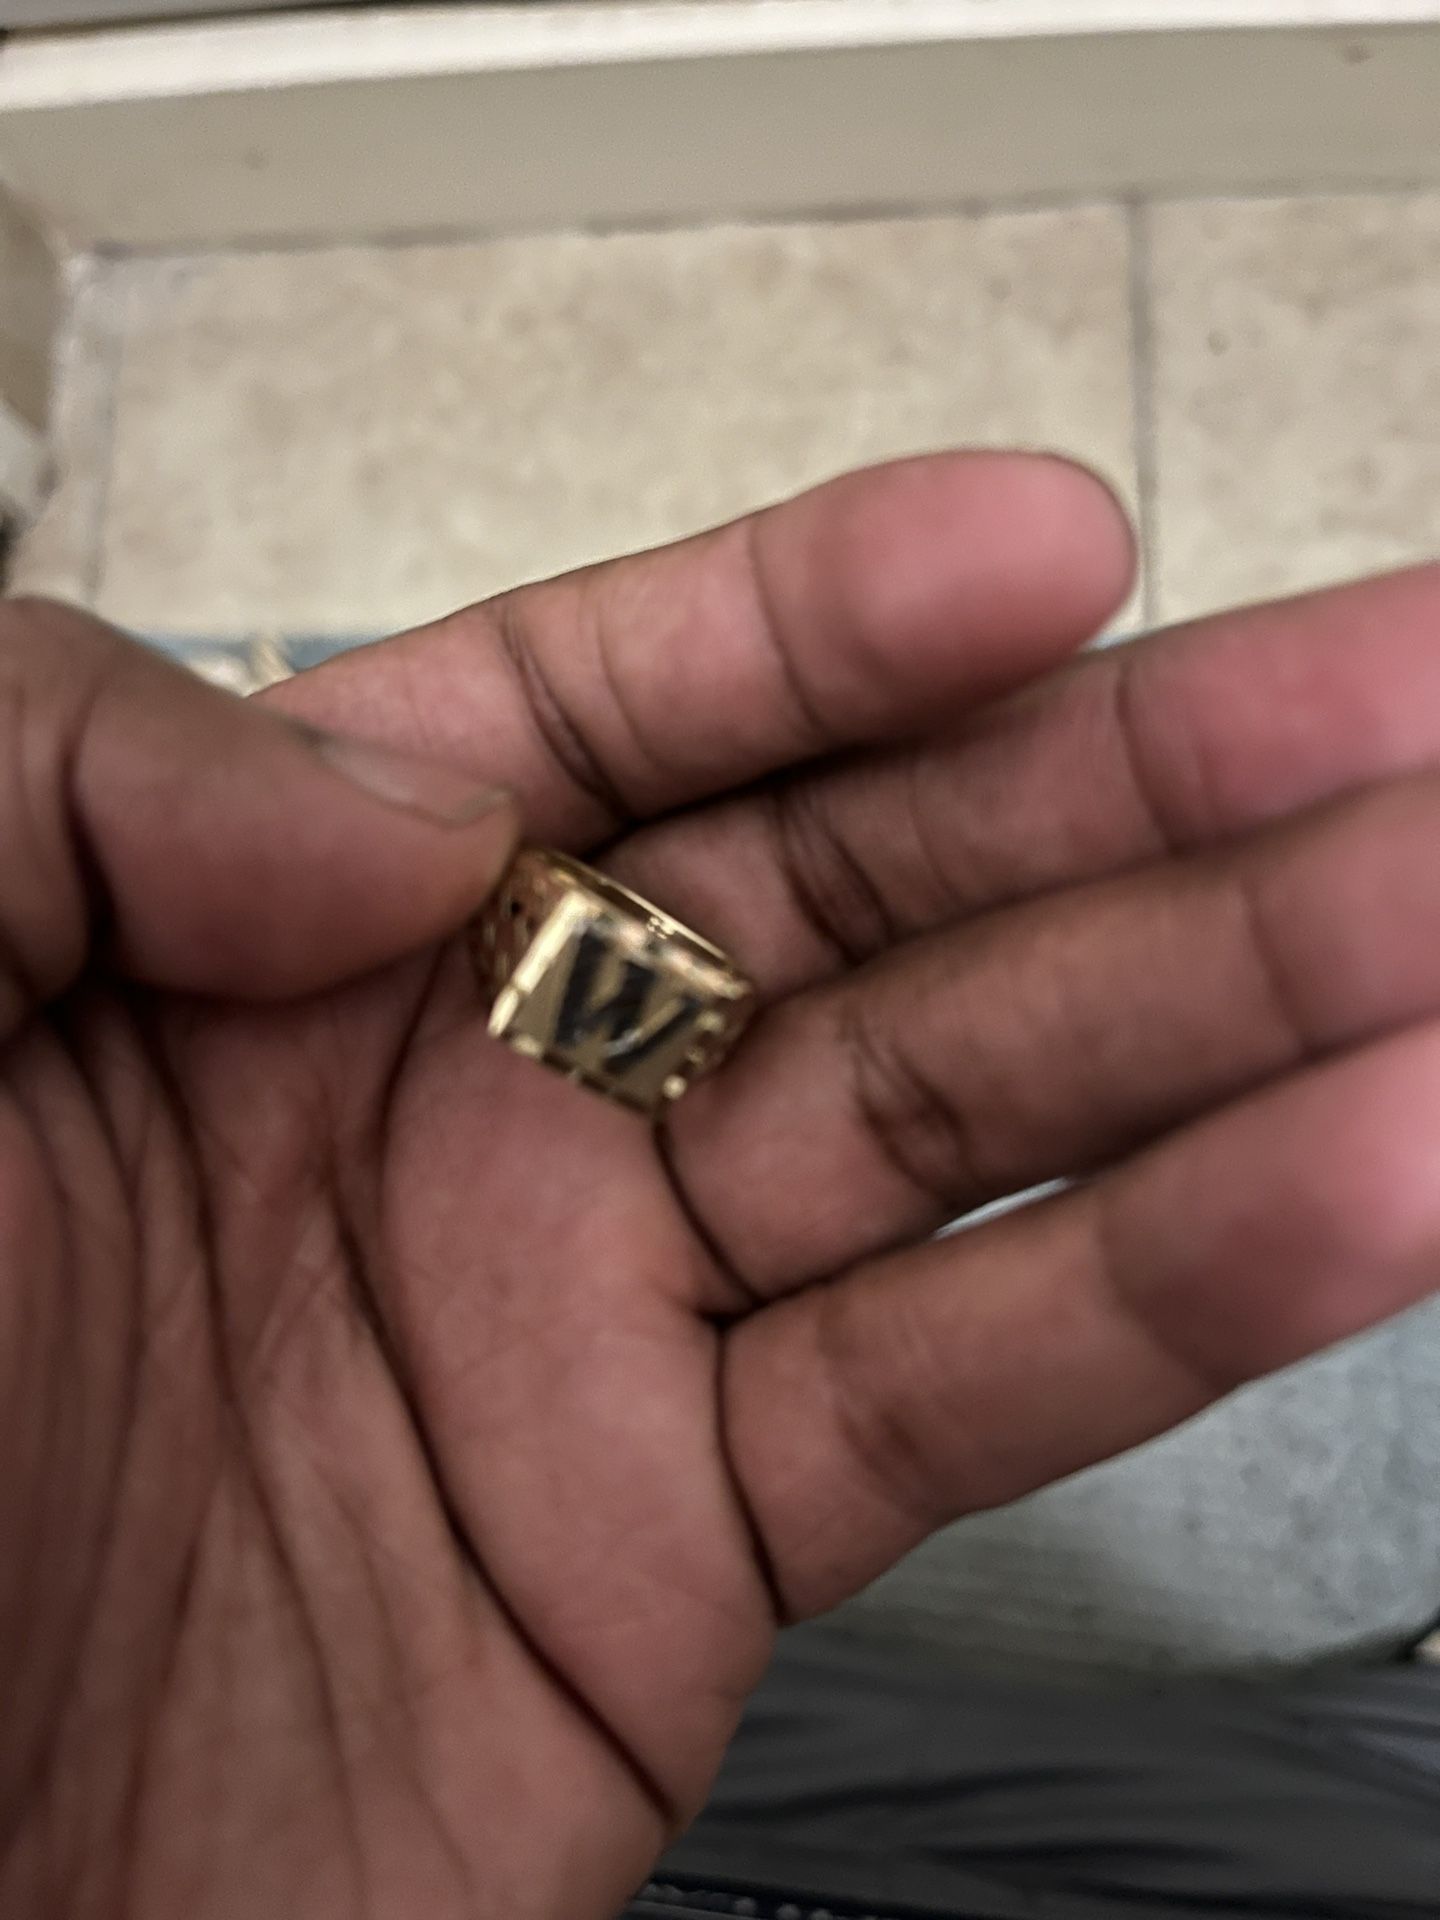 Gold Pendant /Ring-read Description Before Asking Anything. Info All There